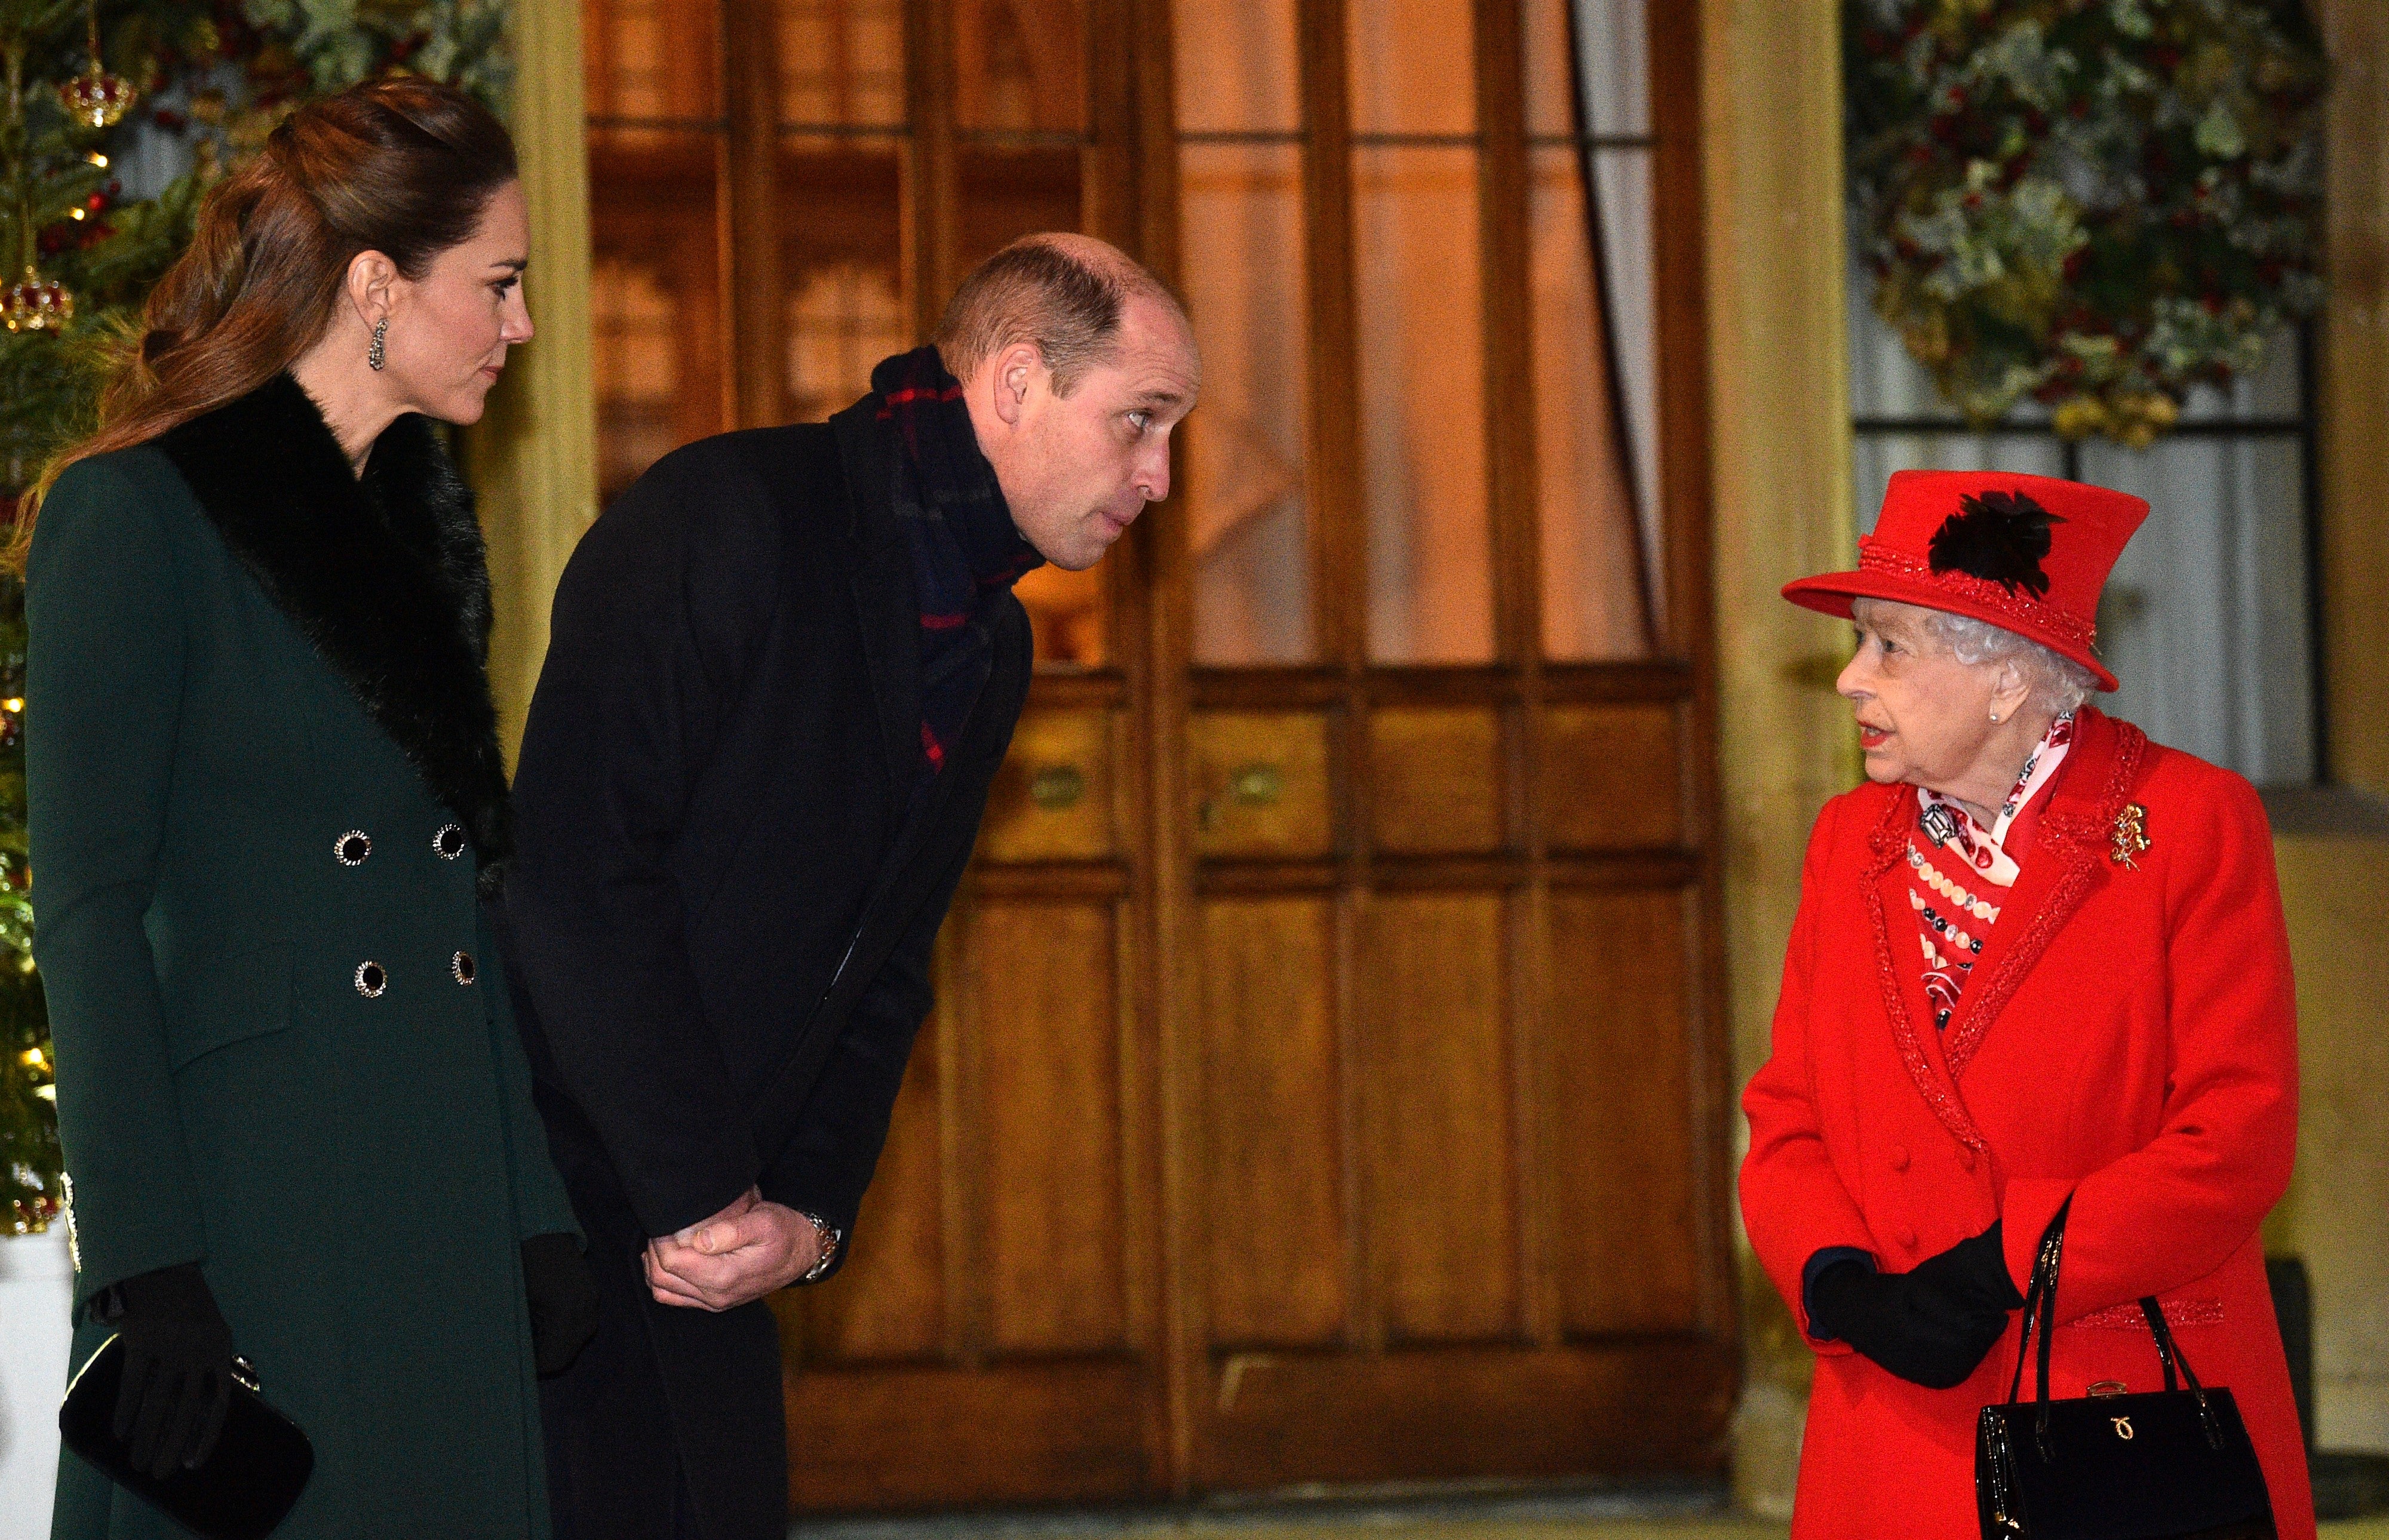 The Queen with the Duke and Duchess of Cambridge at Windsor Castle (Glyn Kirk/PA)